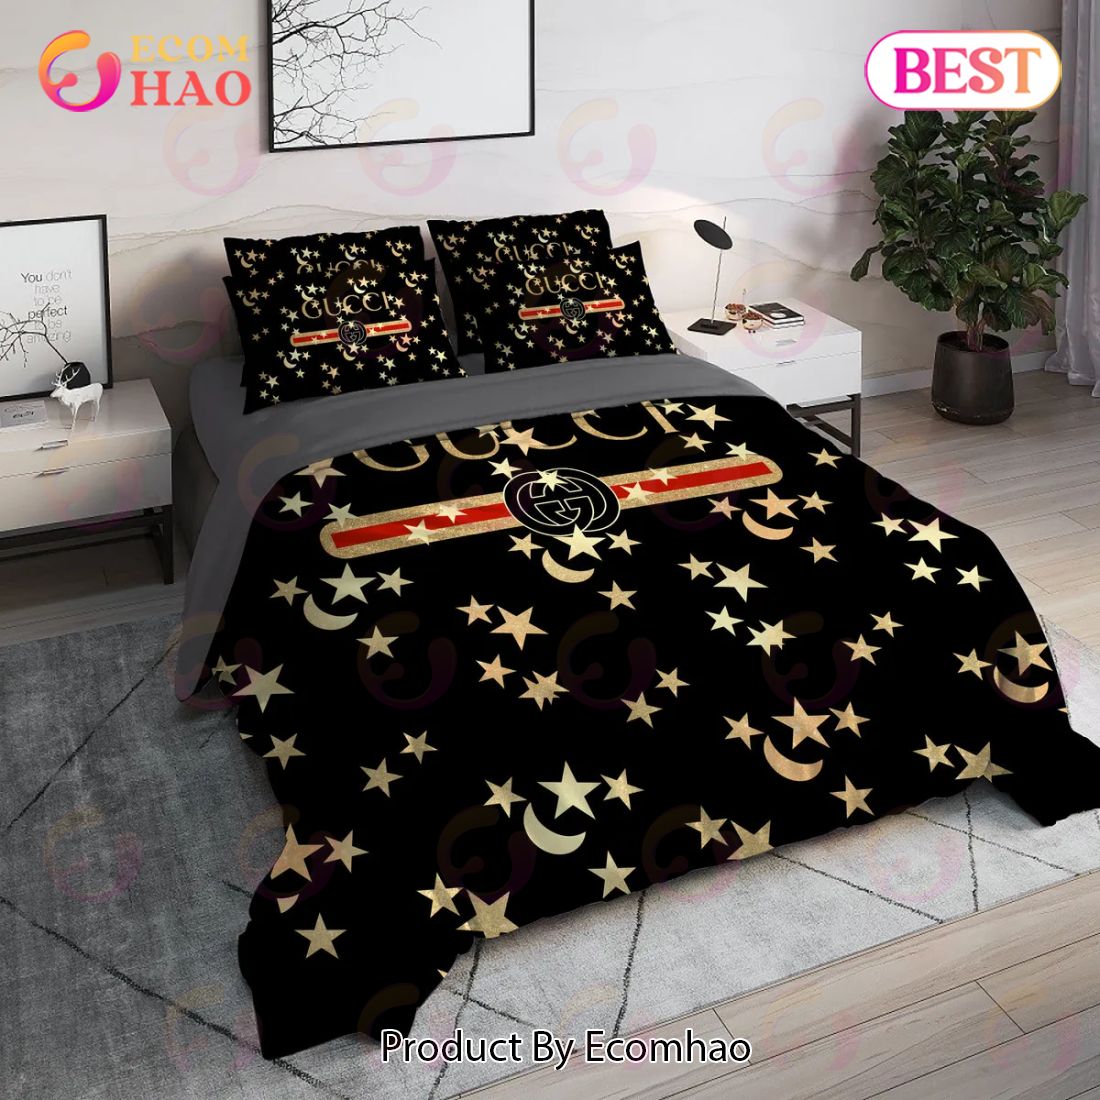 Gucci Moon Star Luxury Brand High End Premium Bedding Set For Bedroom  Luxury Bedspread Duvet Cover Set With Pillowcases Home Decoration - Ecomhao  Store